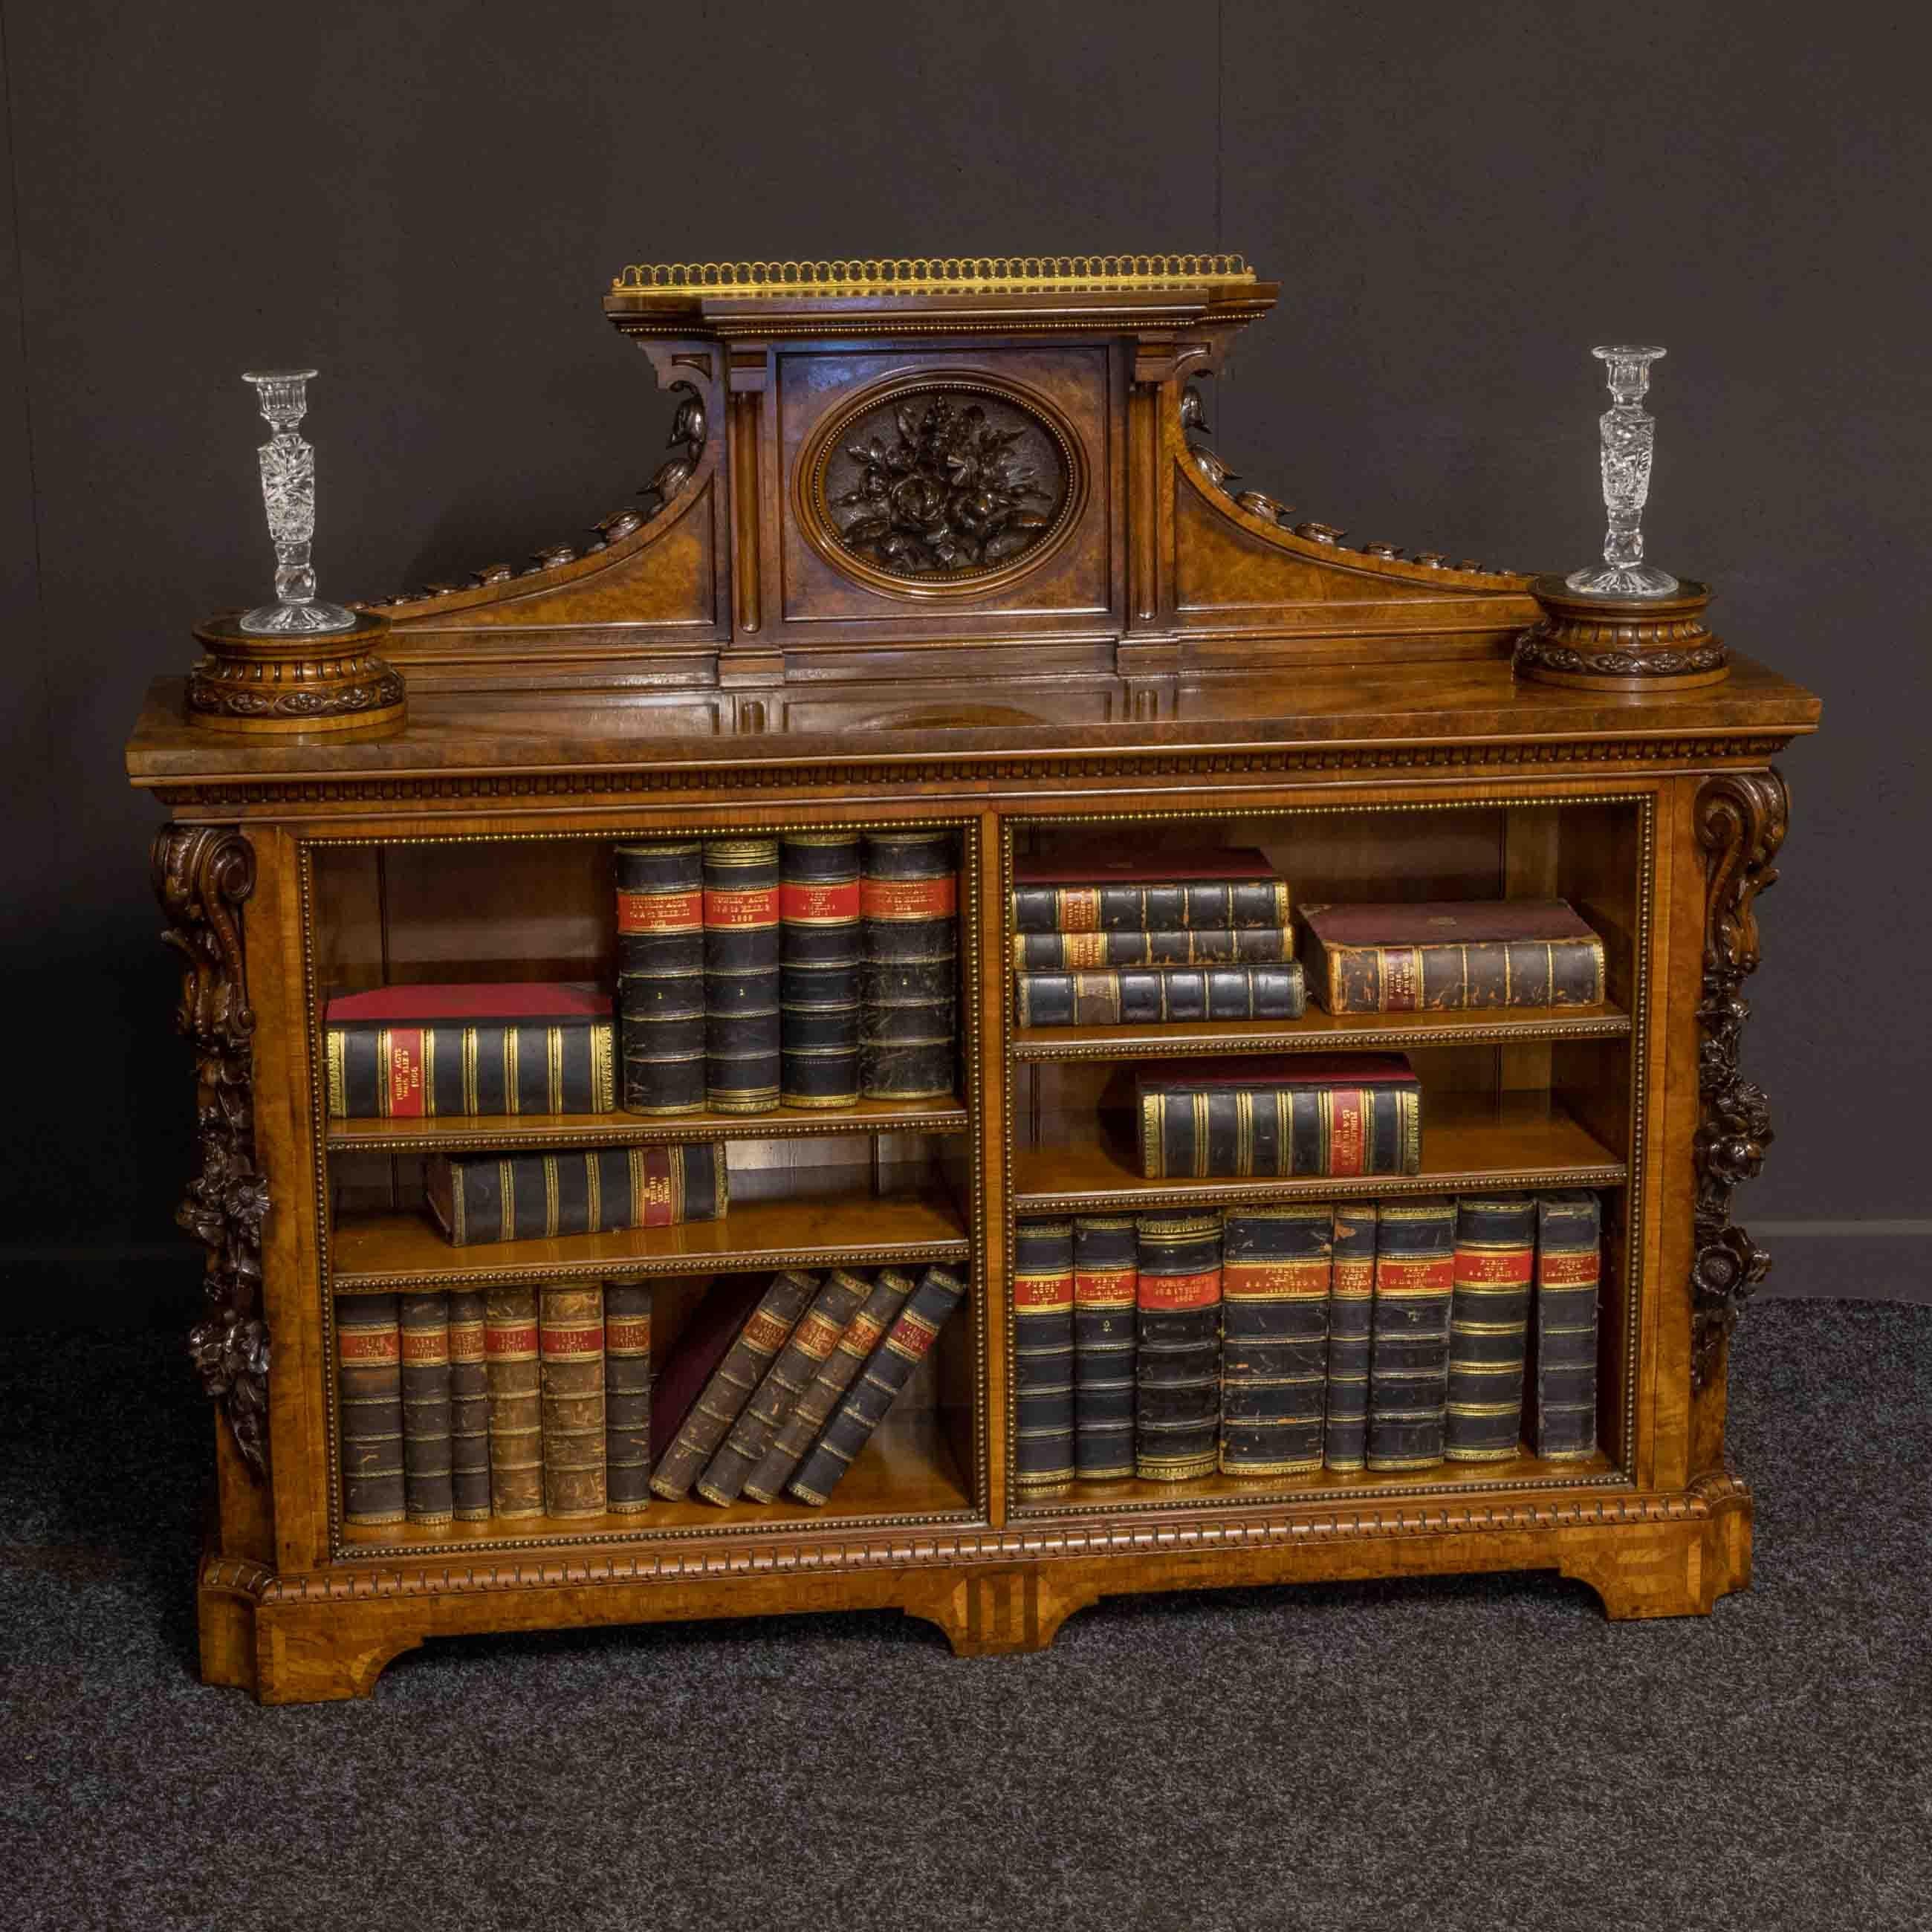 A most unusual Victorian burr walnut veneered bookcase of quite low standing yet absolutely original. Rare to get a pair of plinths set into the top still with their tooled leather surfaces. These would look fantastic with a pair of Parian figures